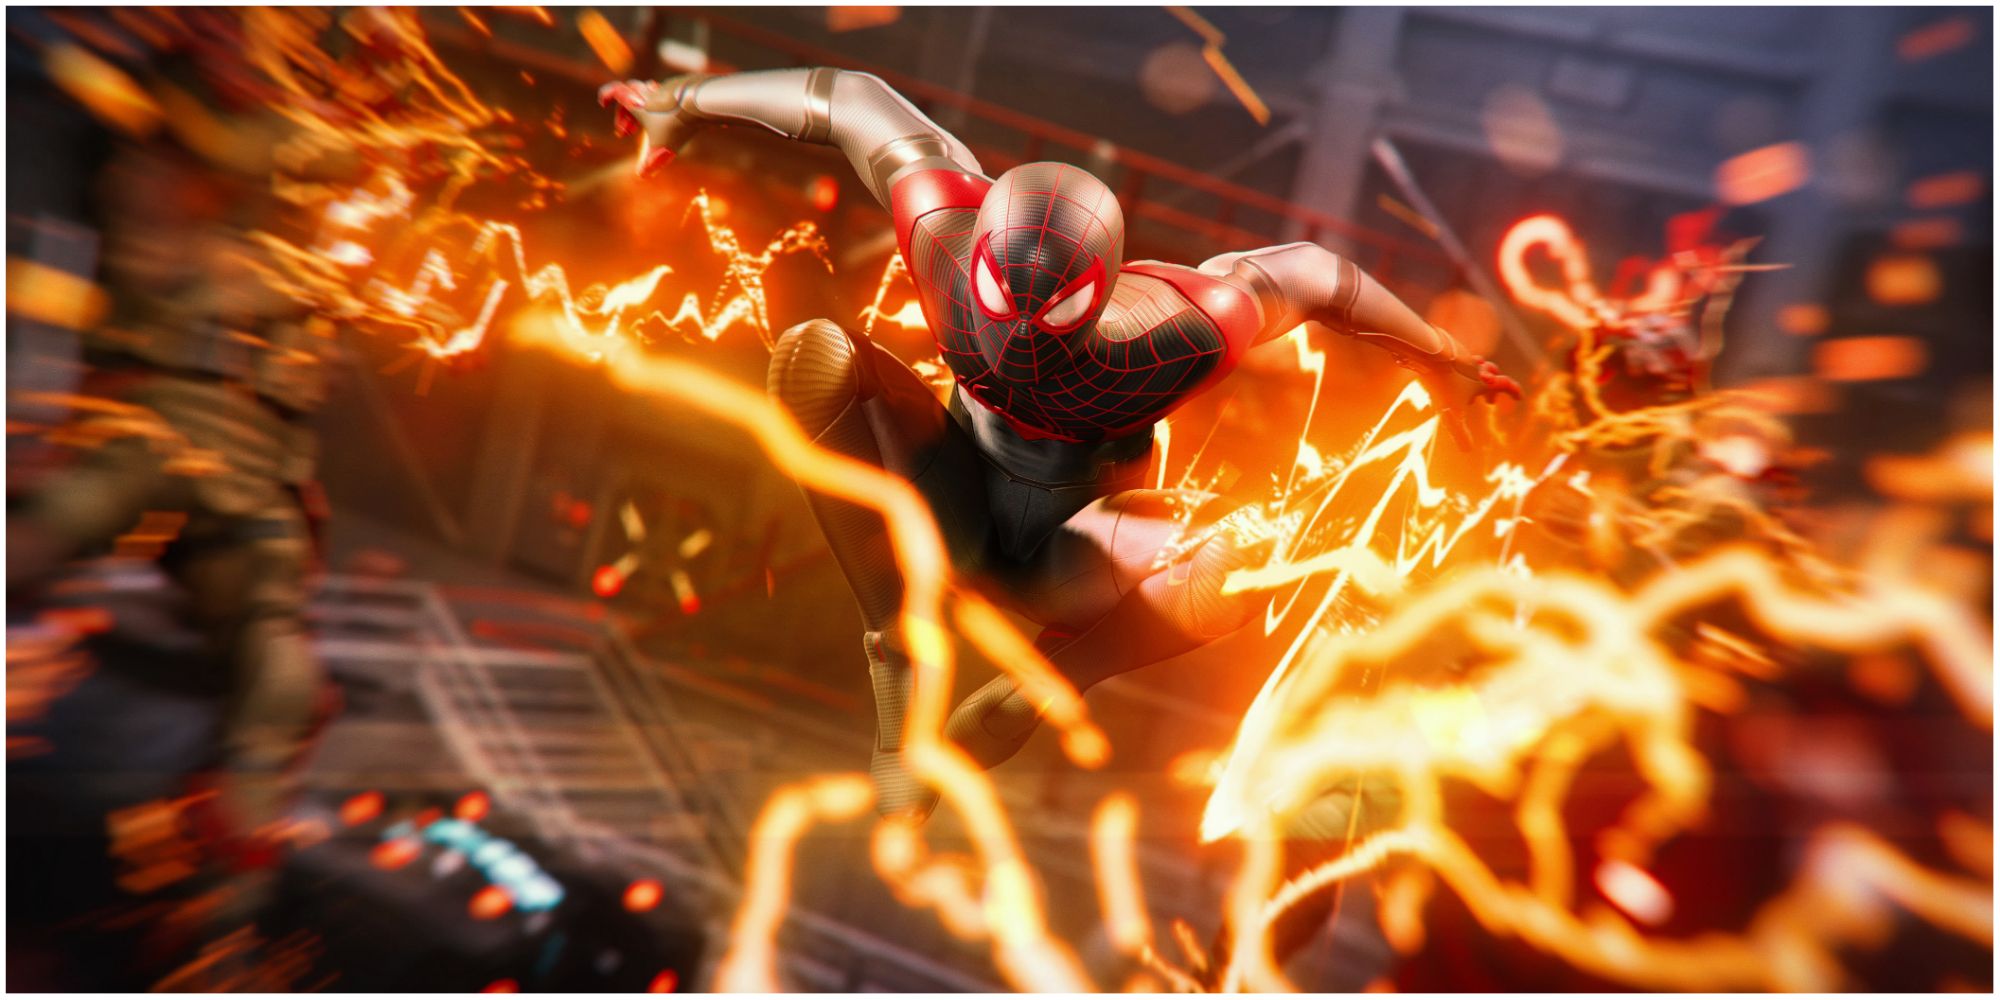 An image of a Venom Dash from Spider-Man Miles Morales